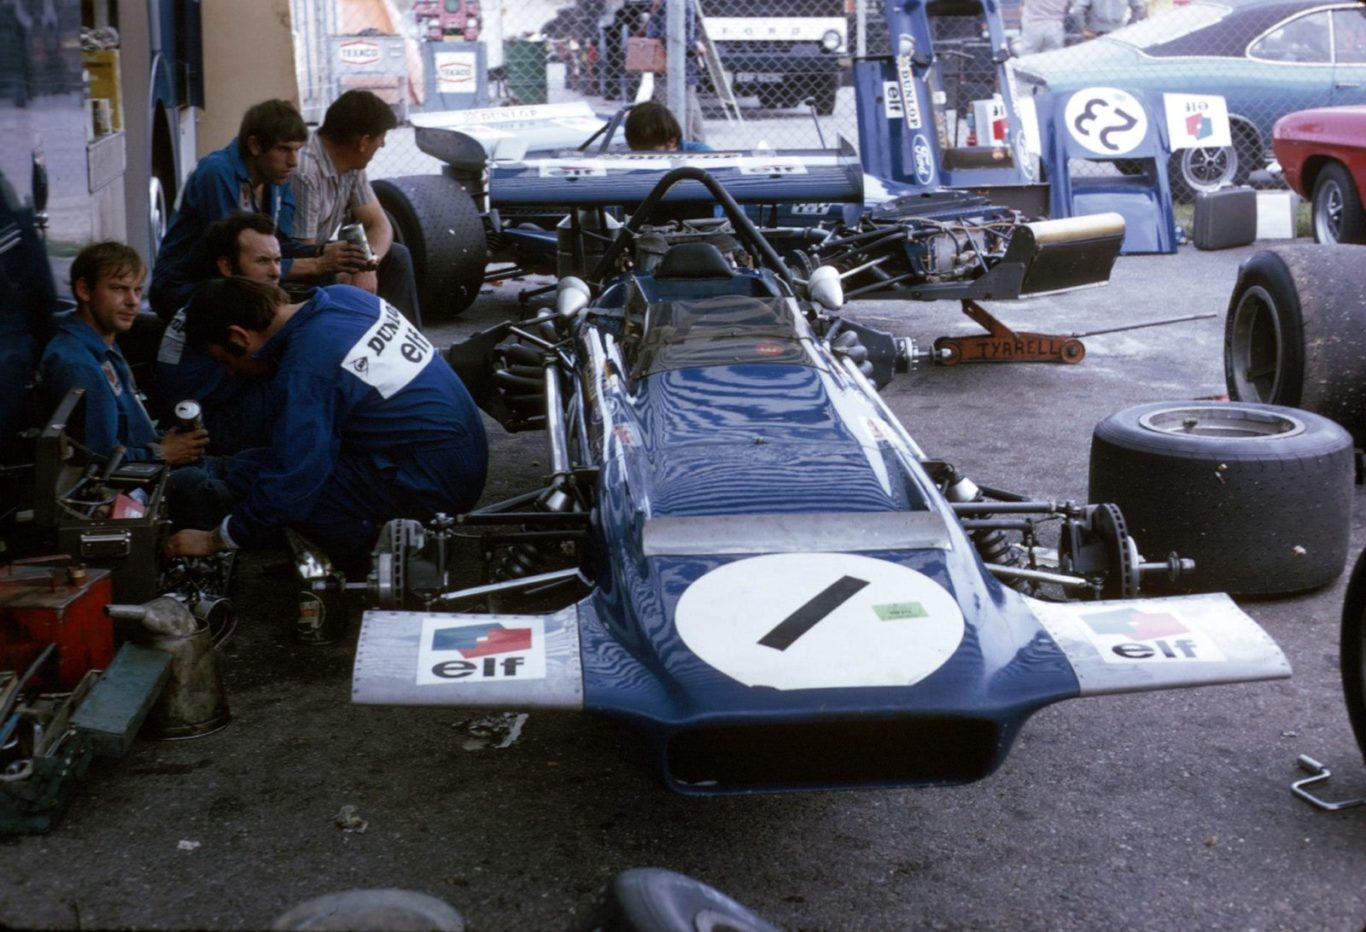 #march 701 Germany 1970 #F1 - Internal-Combustion.com